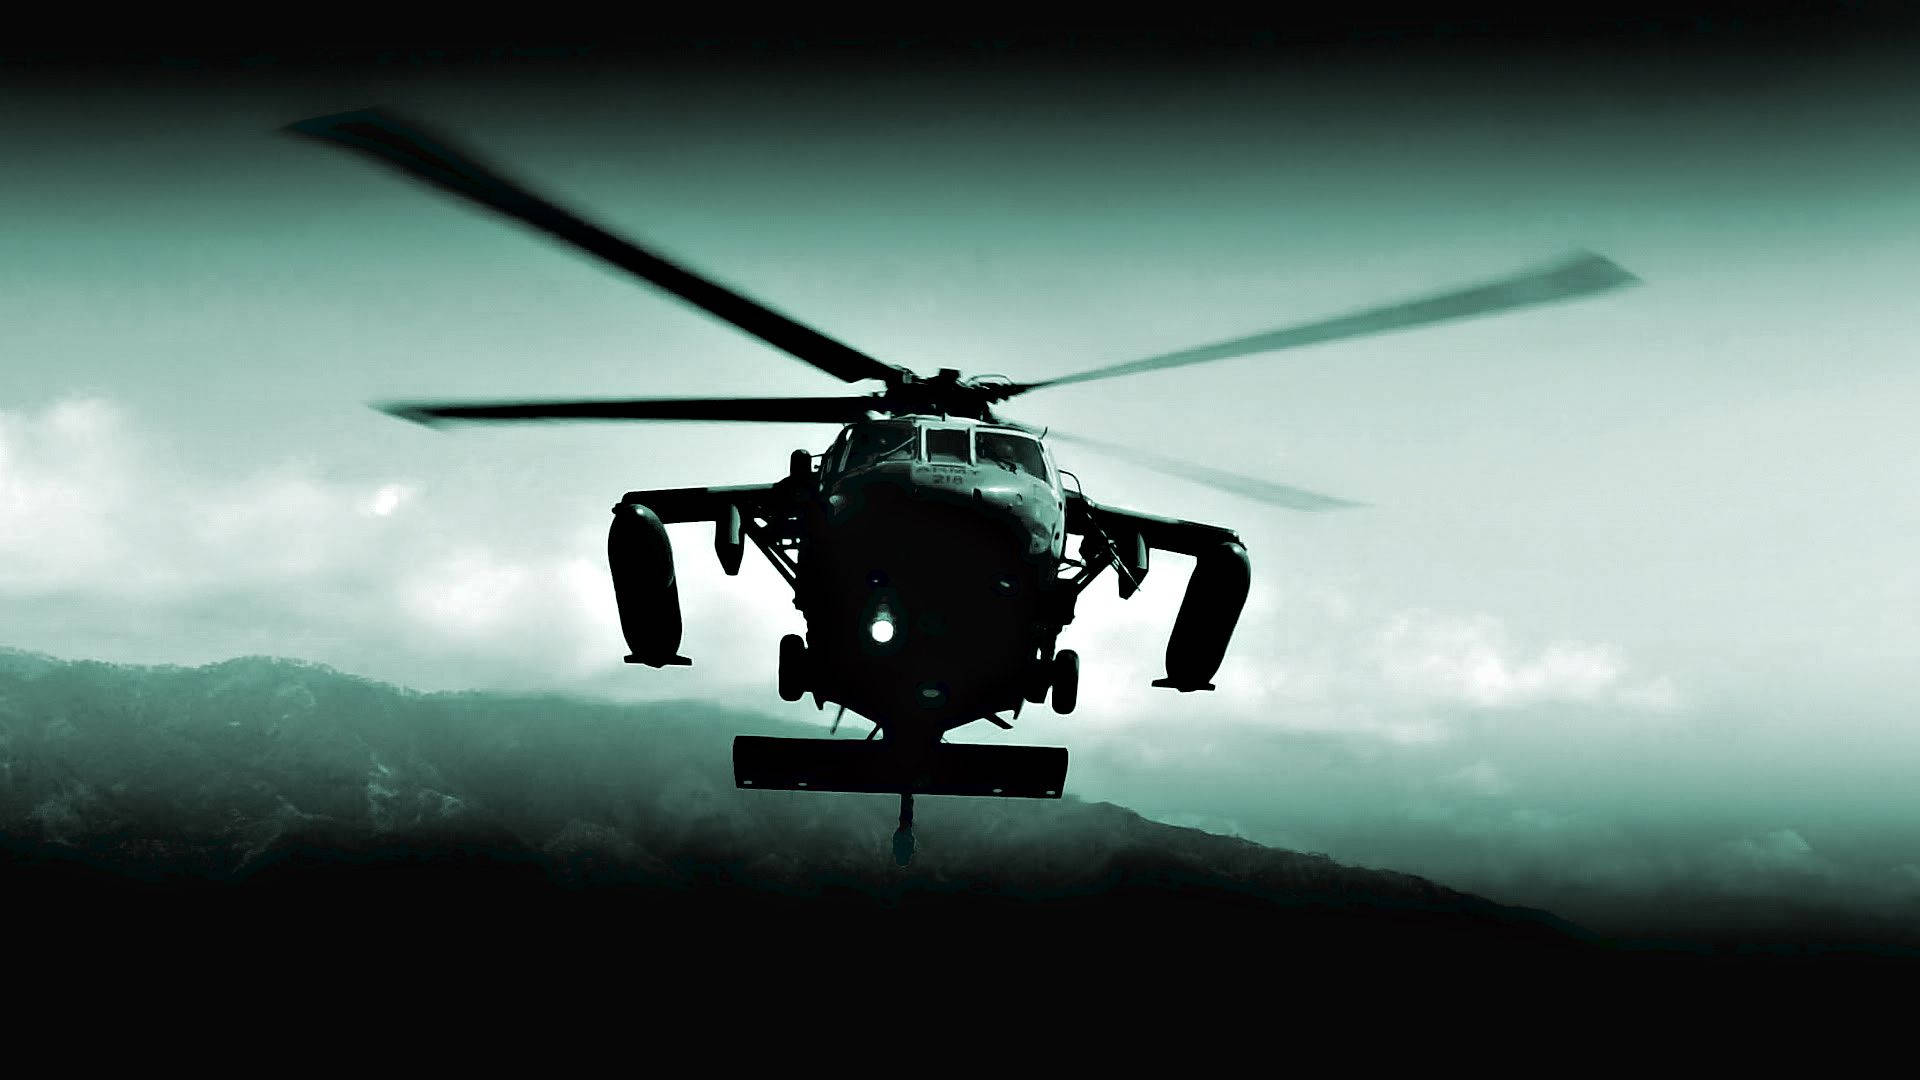 A view of a U.S. Army Black Hawk Helicopter in action Wallpaper